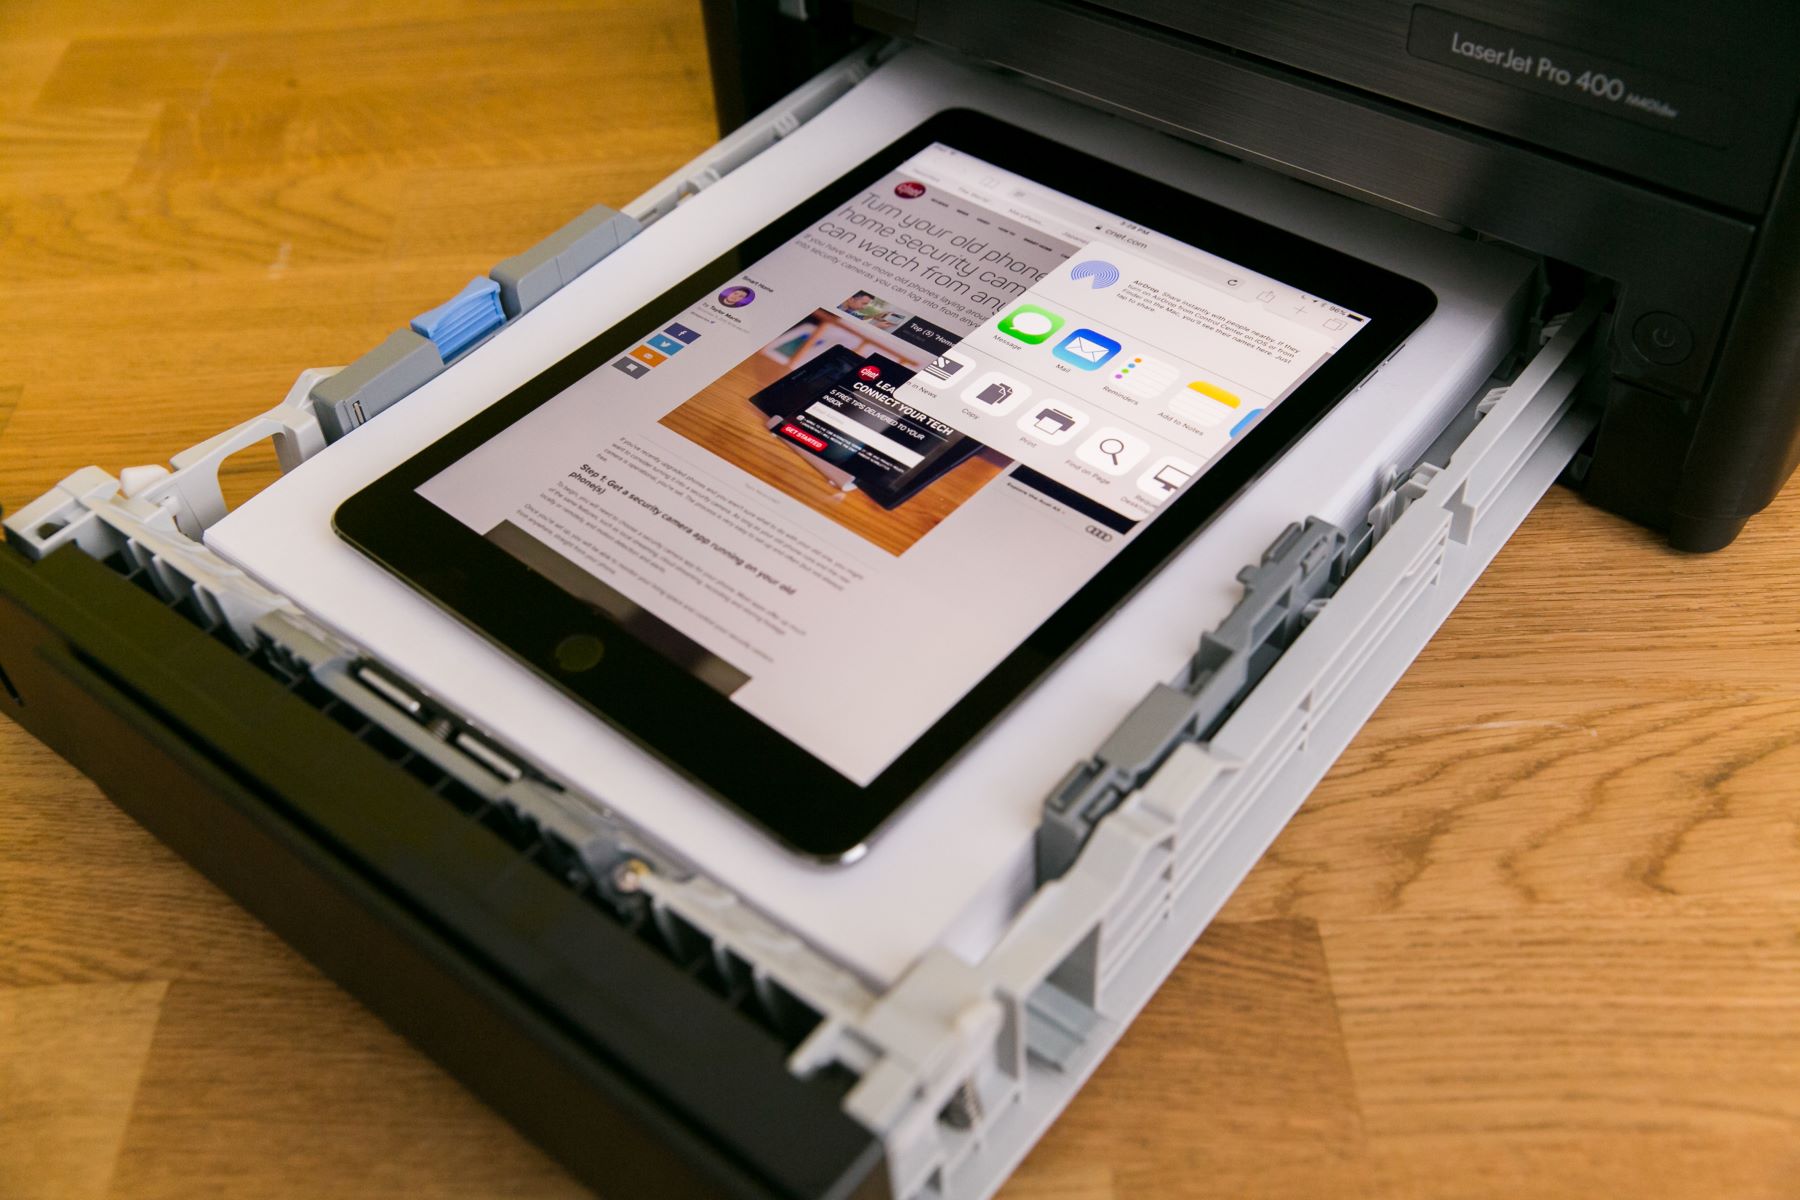 How To Install A Printer On An IPad